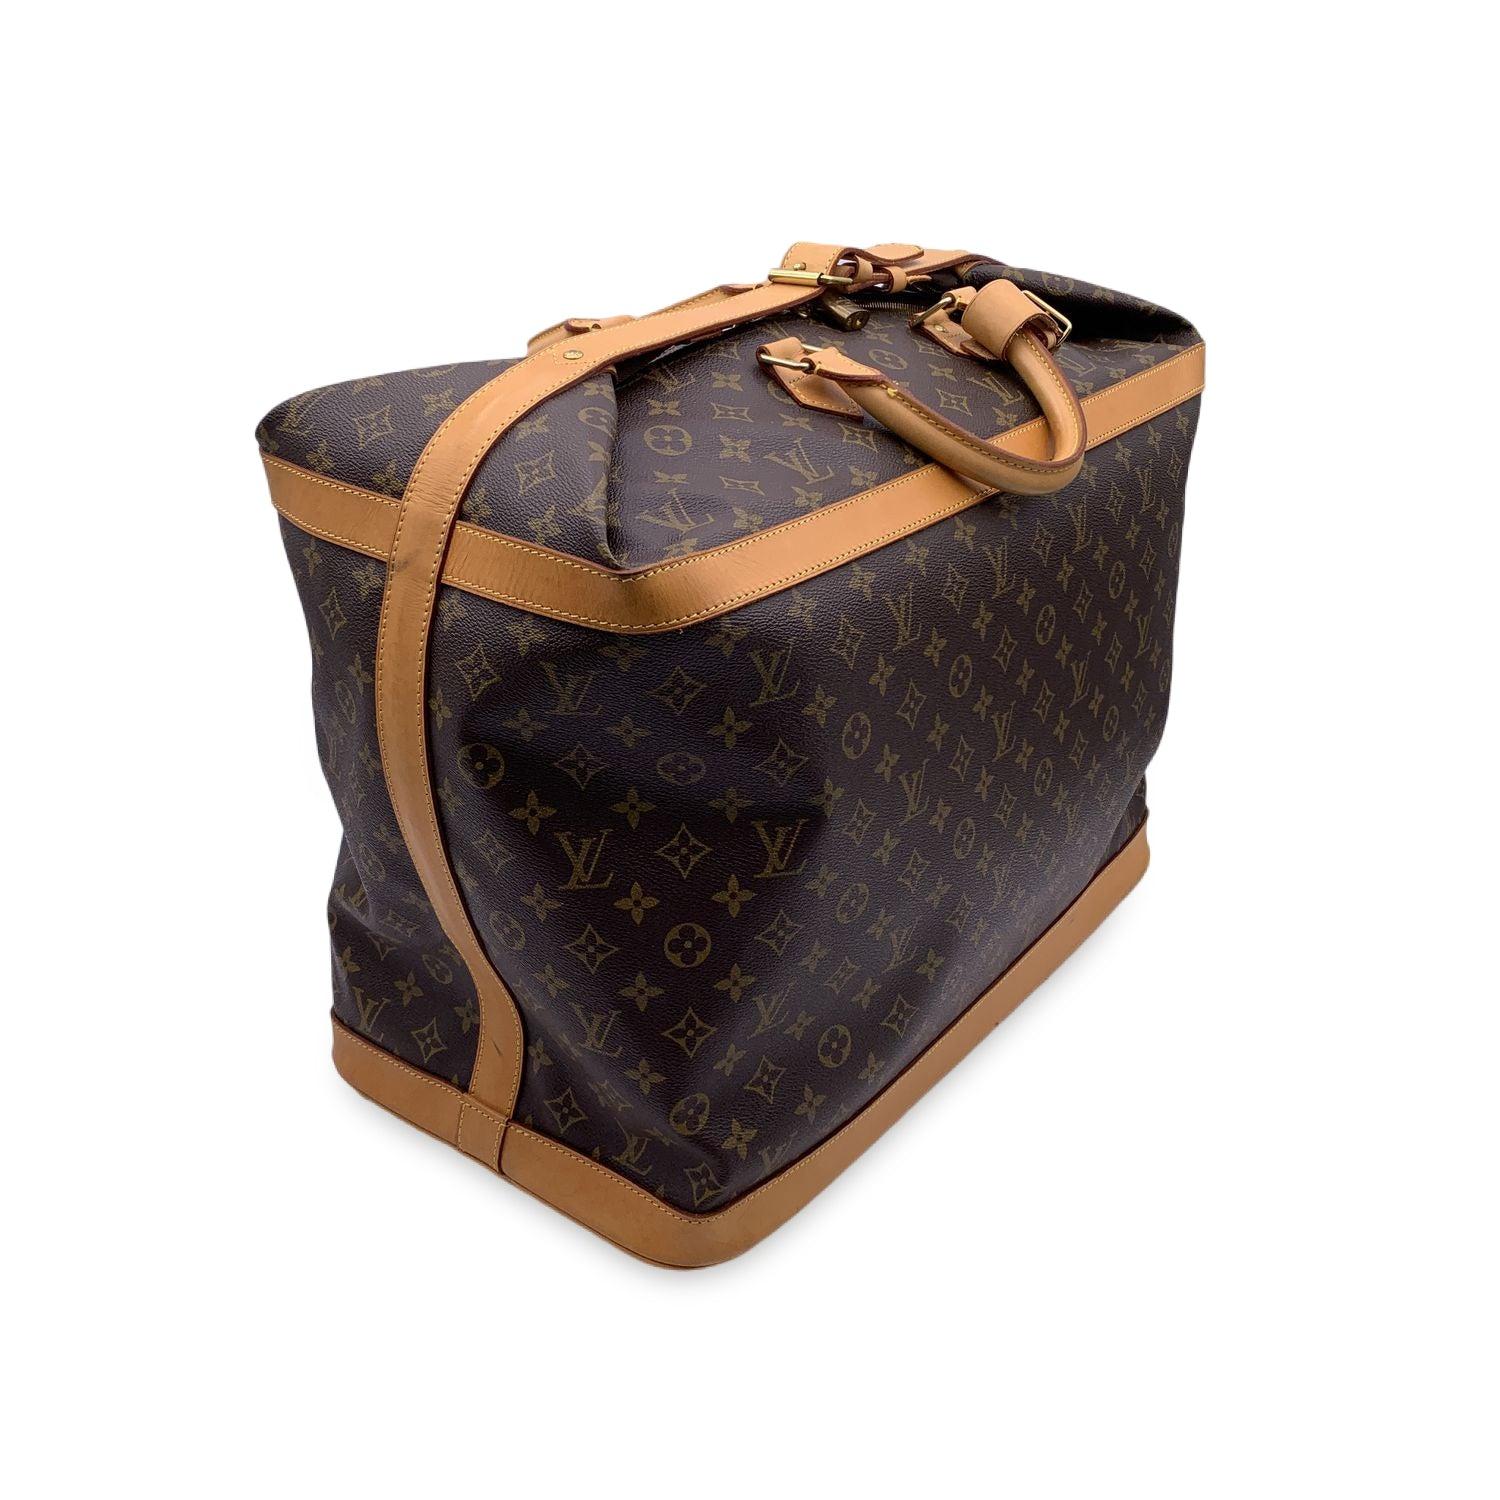 Louis Vuitton 'Cruiser 50' Travel bag. Monogram canvas and beige leather trim. Double zip closure (with original padlock and key included) and additional strap with buckle closure on the top. Brown canvas lining. 1 open pocket inside. Gold metal